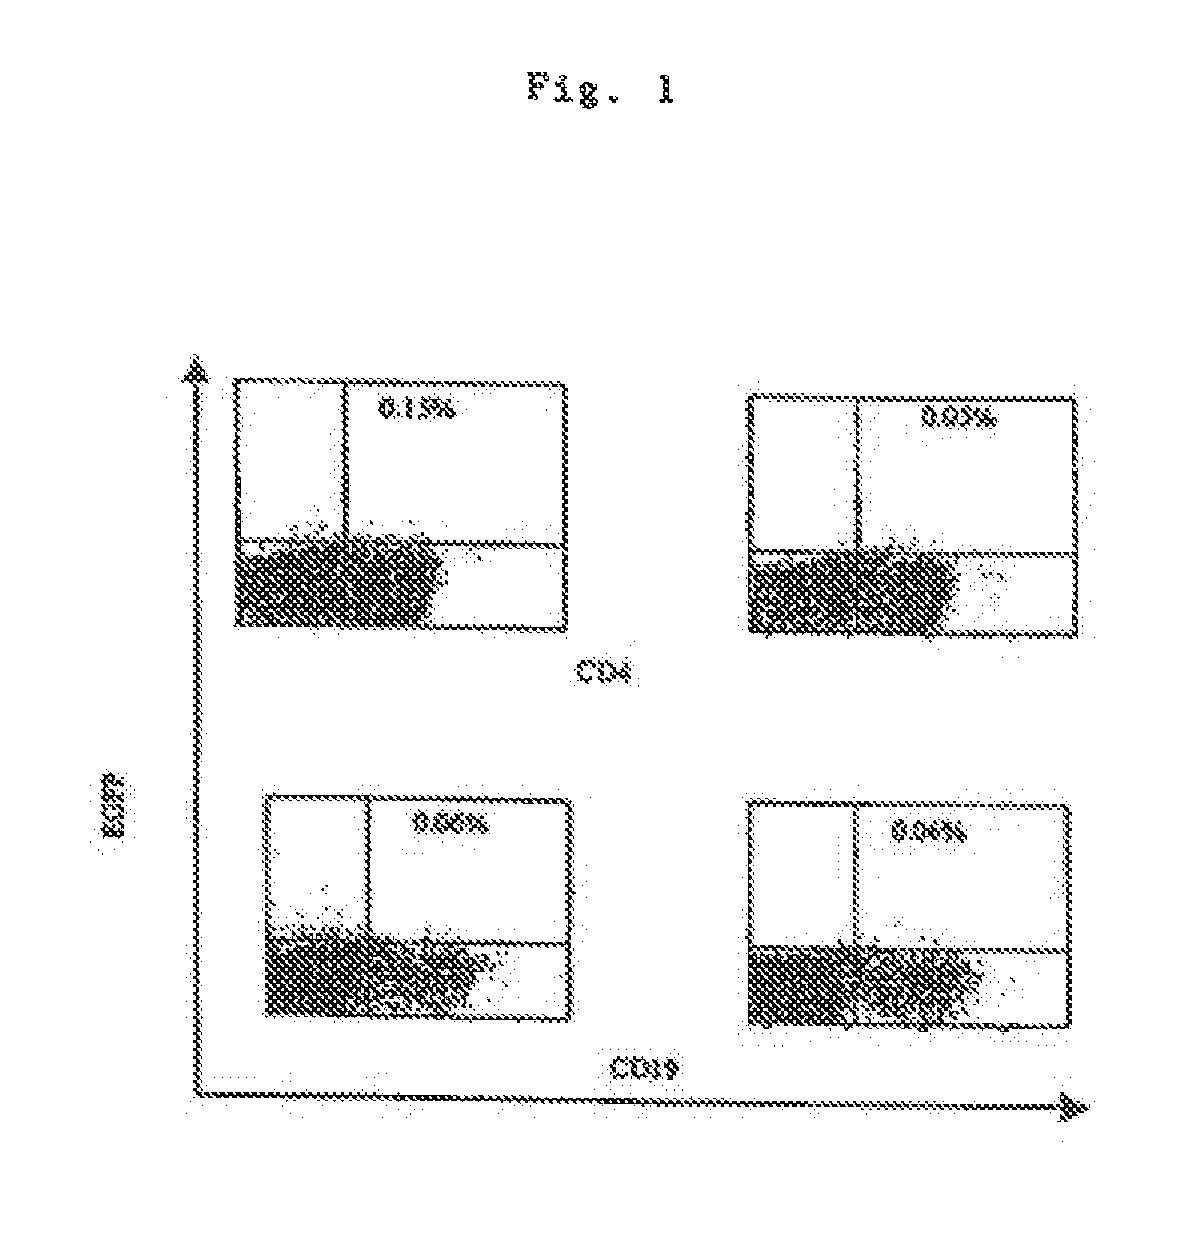 Transfection of blood cells with mRNA for immune stimulation and gene therapy